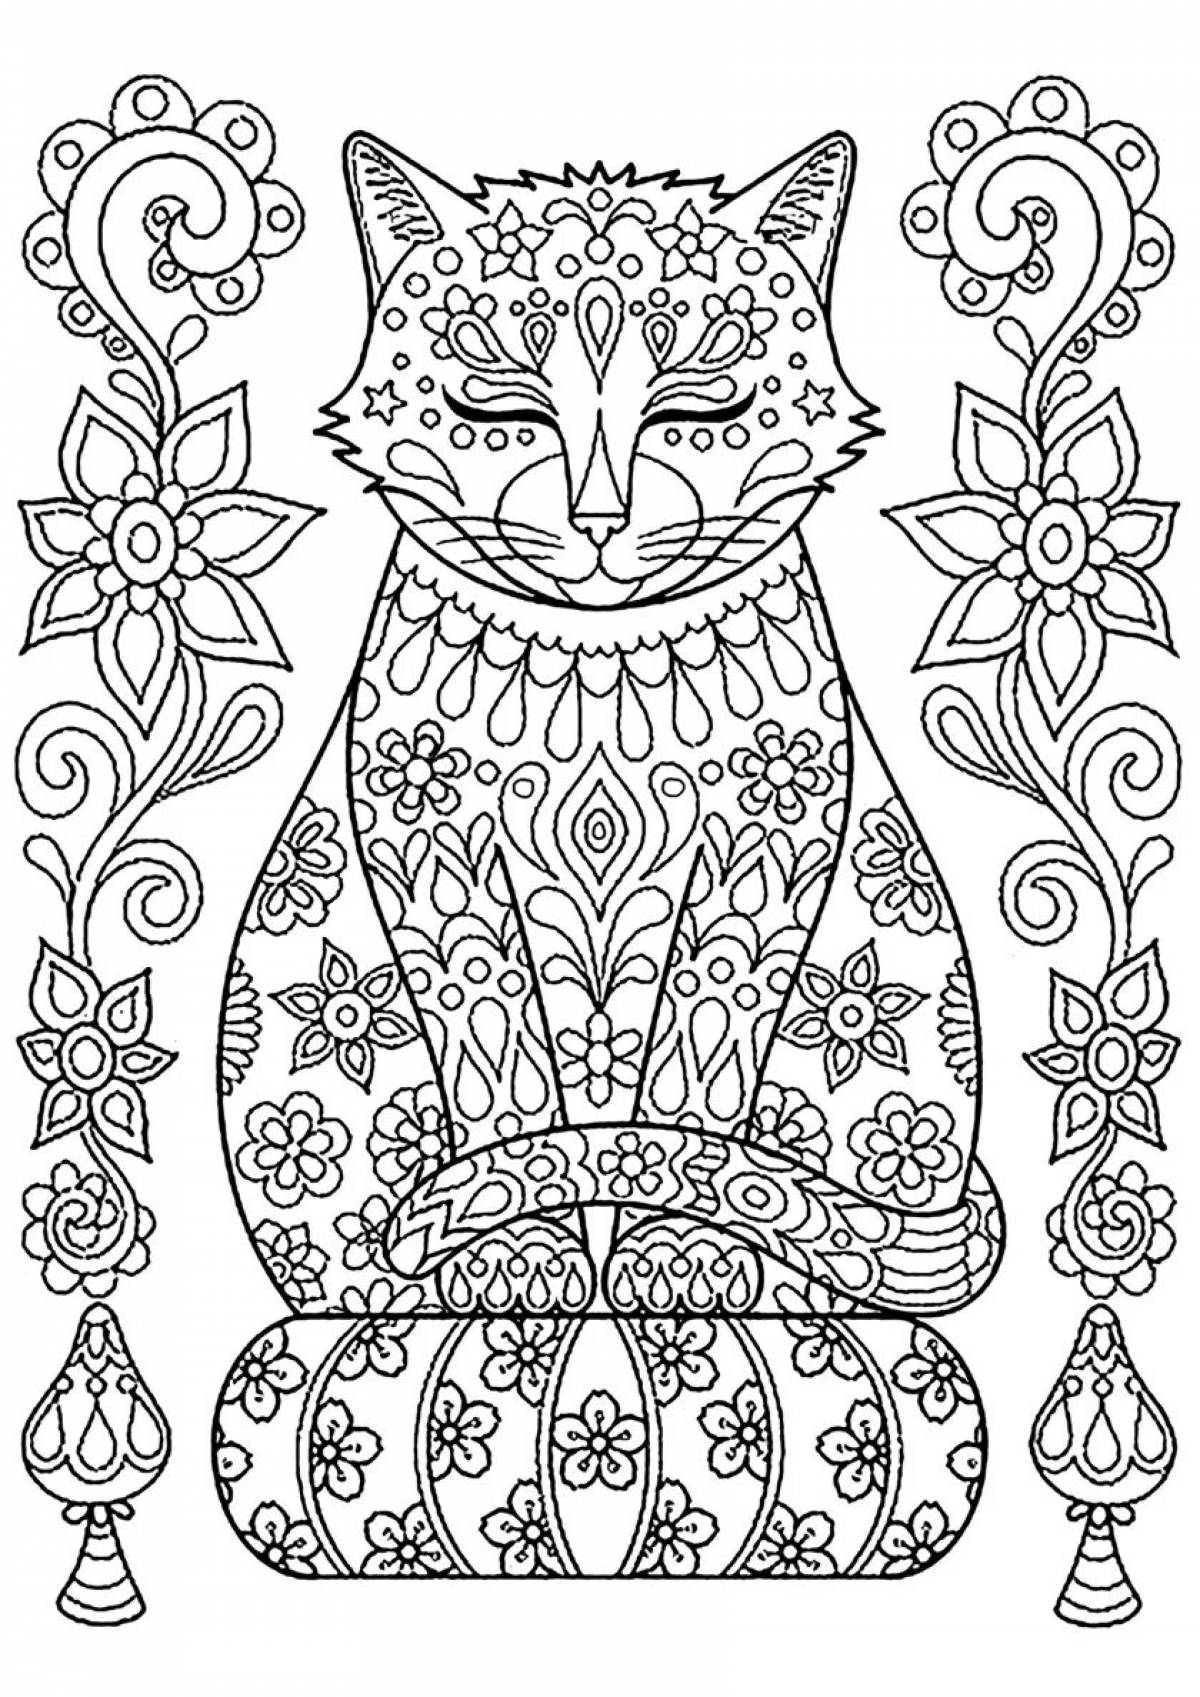 Great coloring book for cats